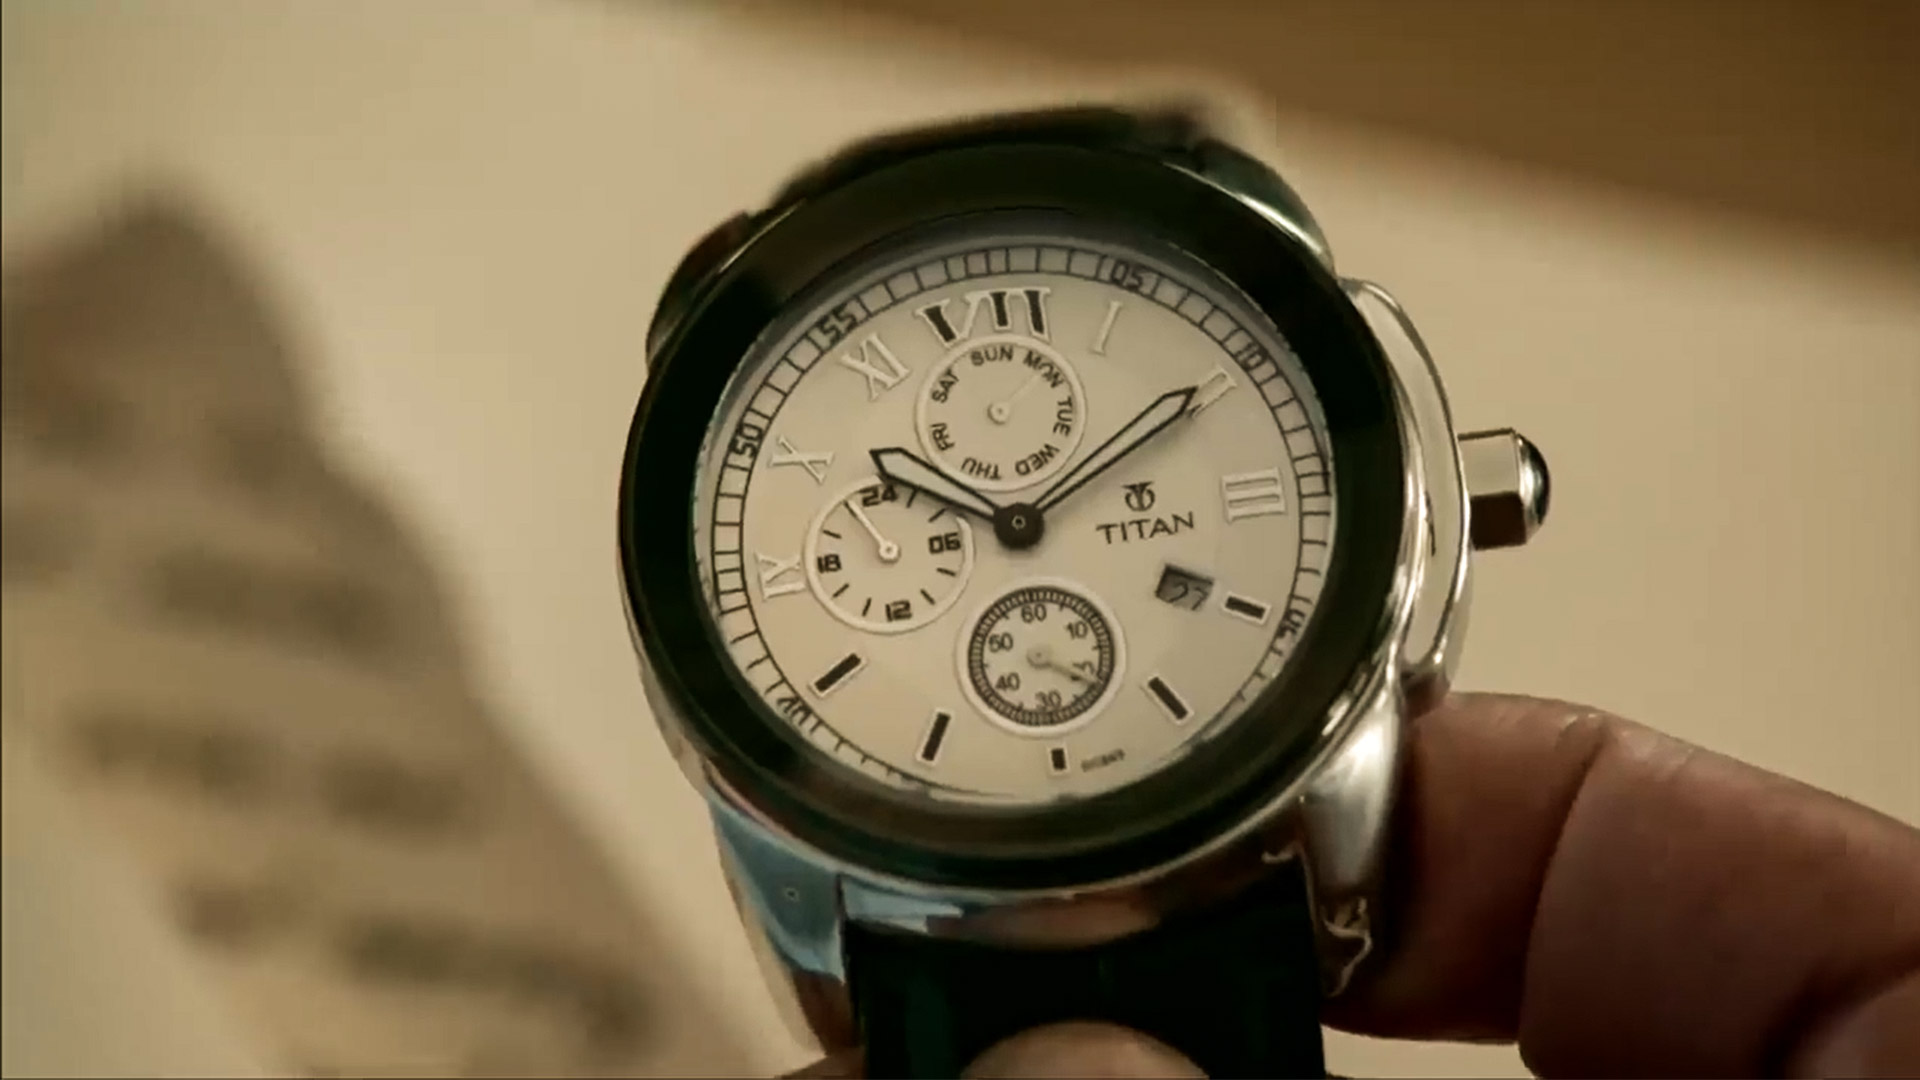 A watch from the Titan Company 